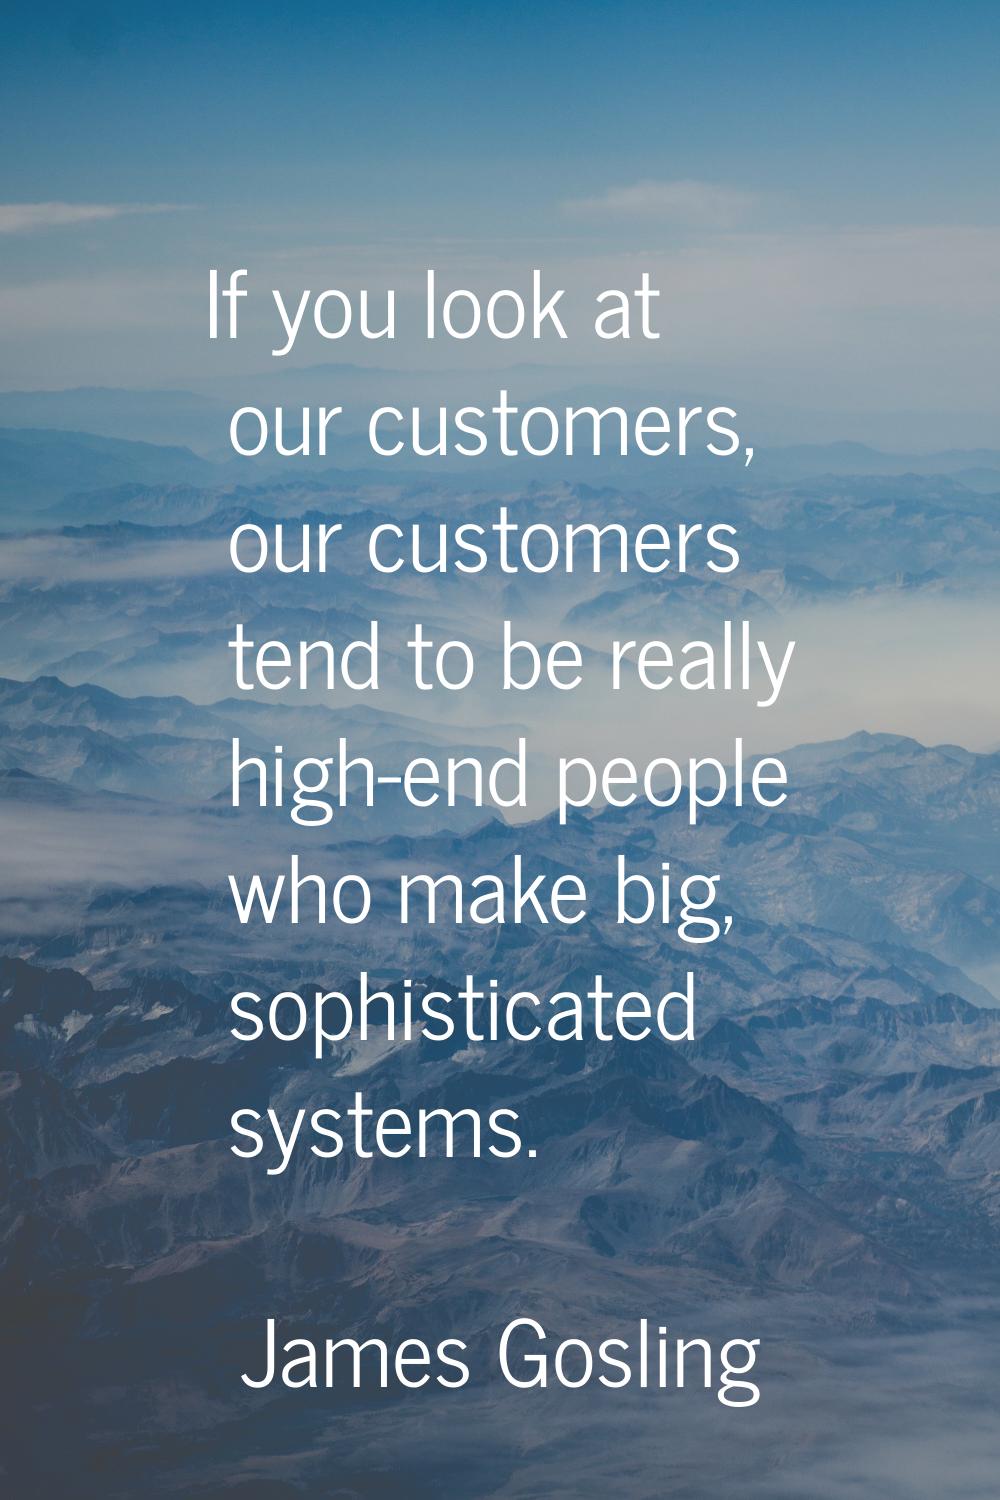 If you look at our customers, our customers tend to be really high-end people who make big, sophist